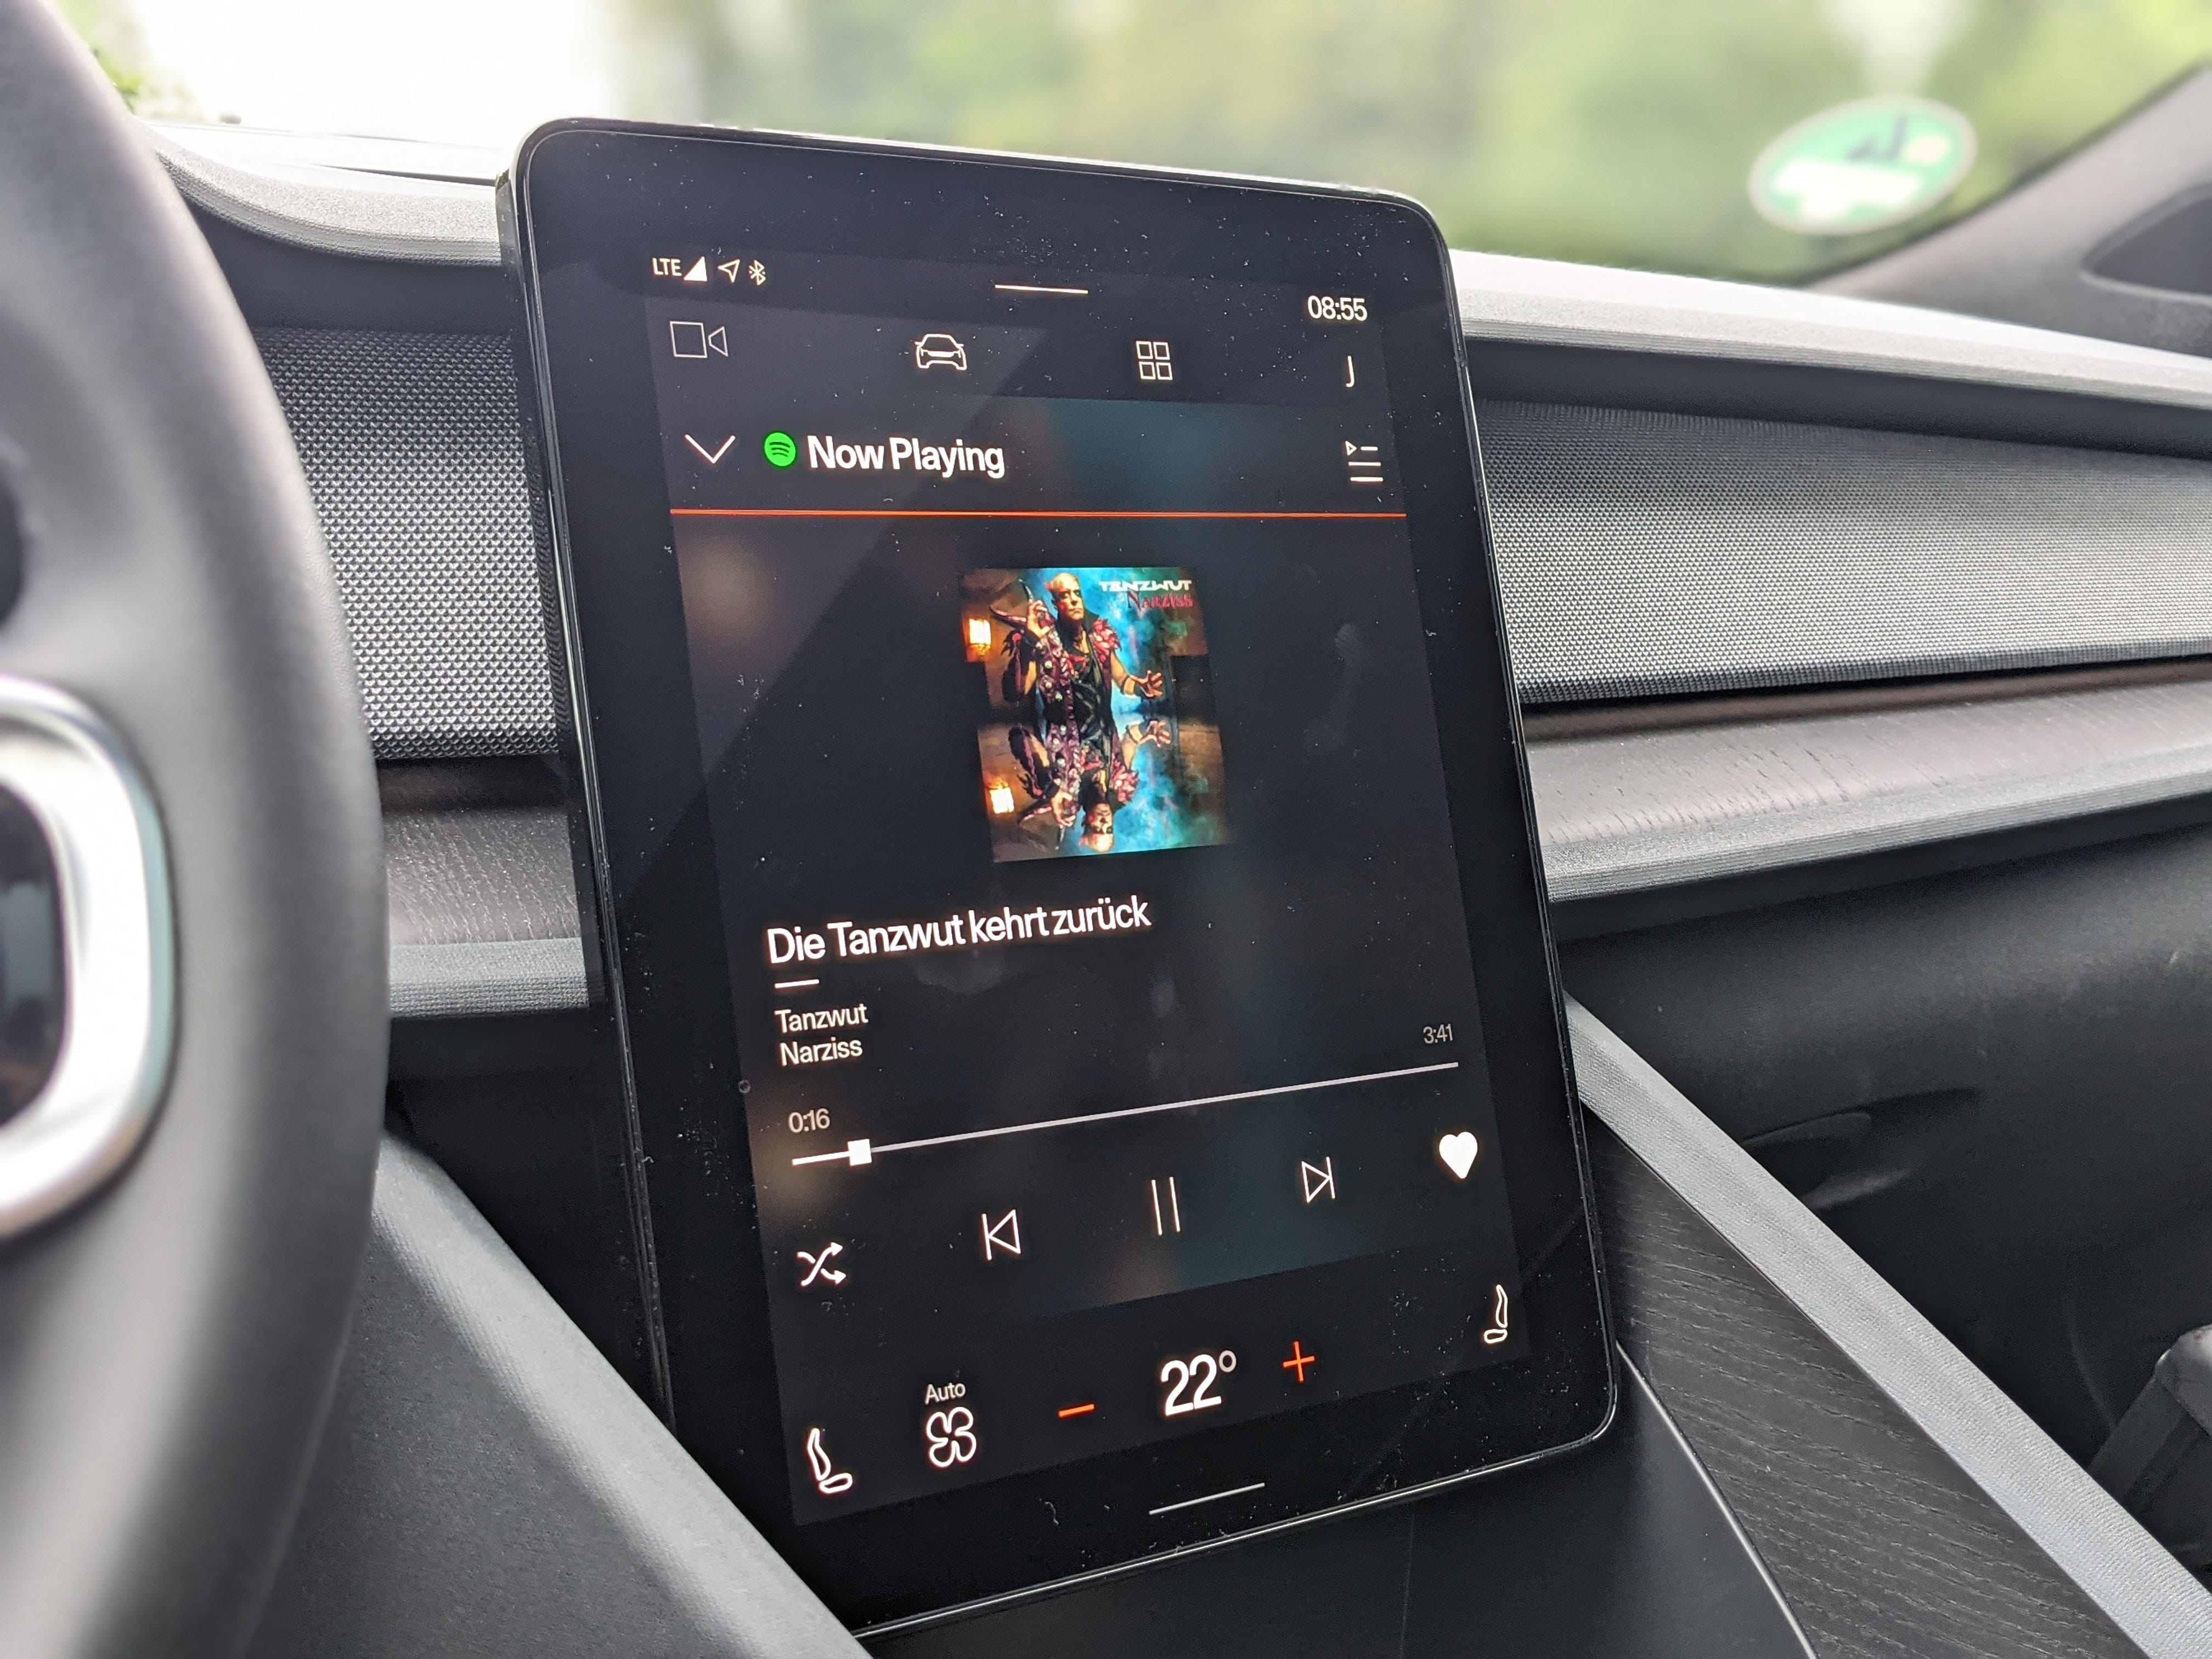 CarPlay fully setup in BMW iX (Mainscreen, Cluster and Heads-up